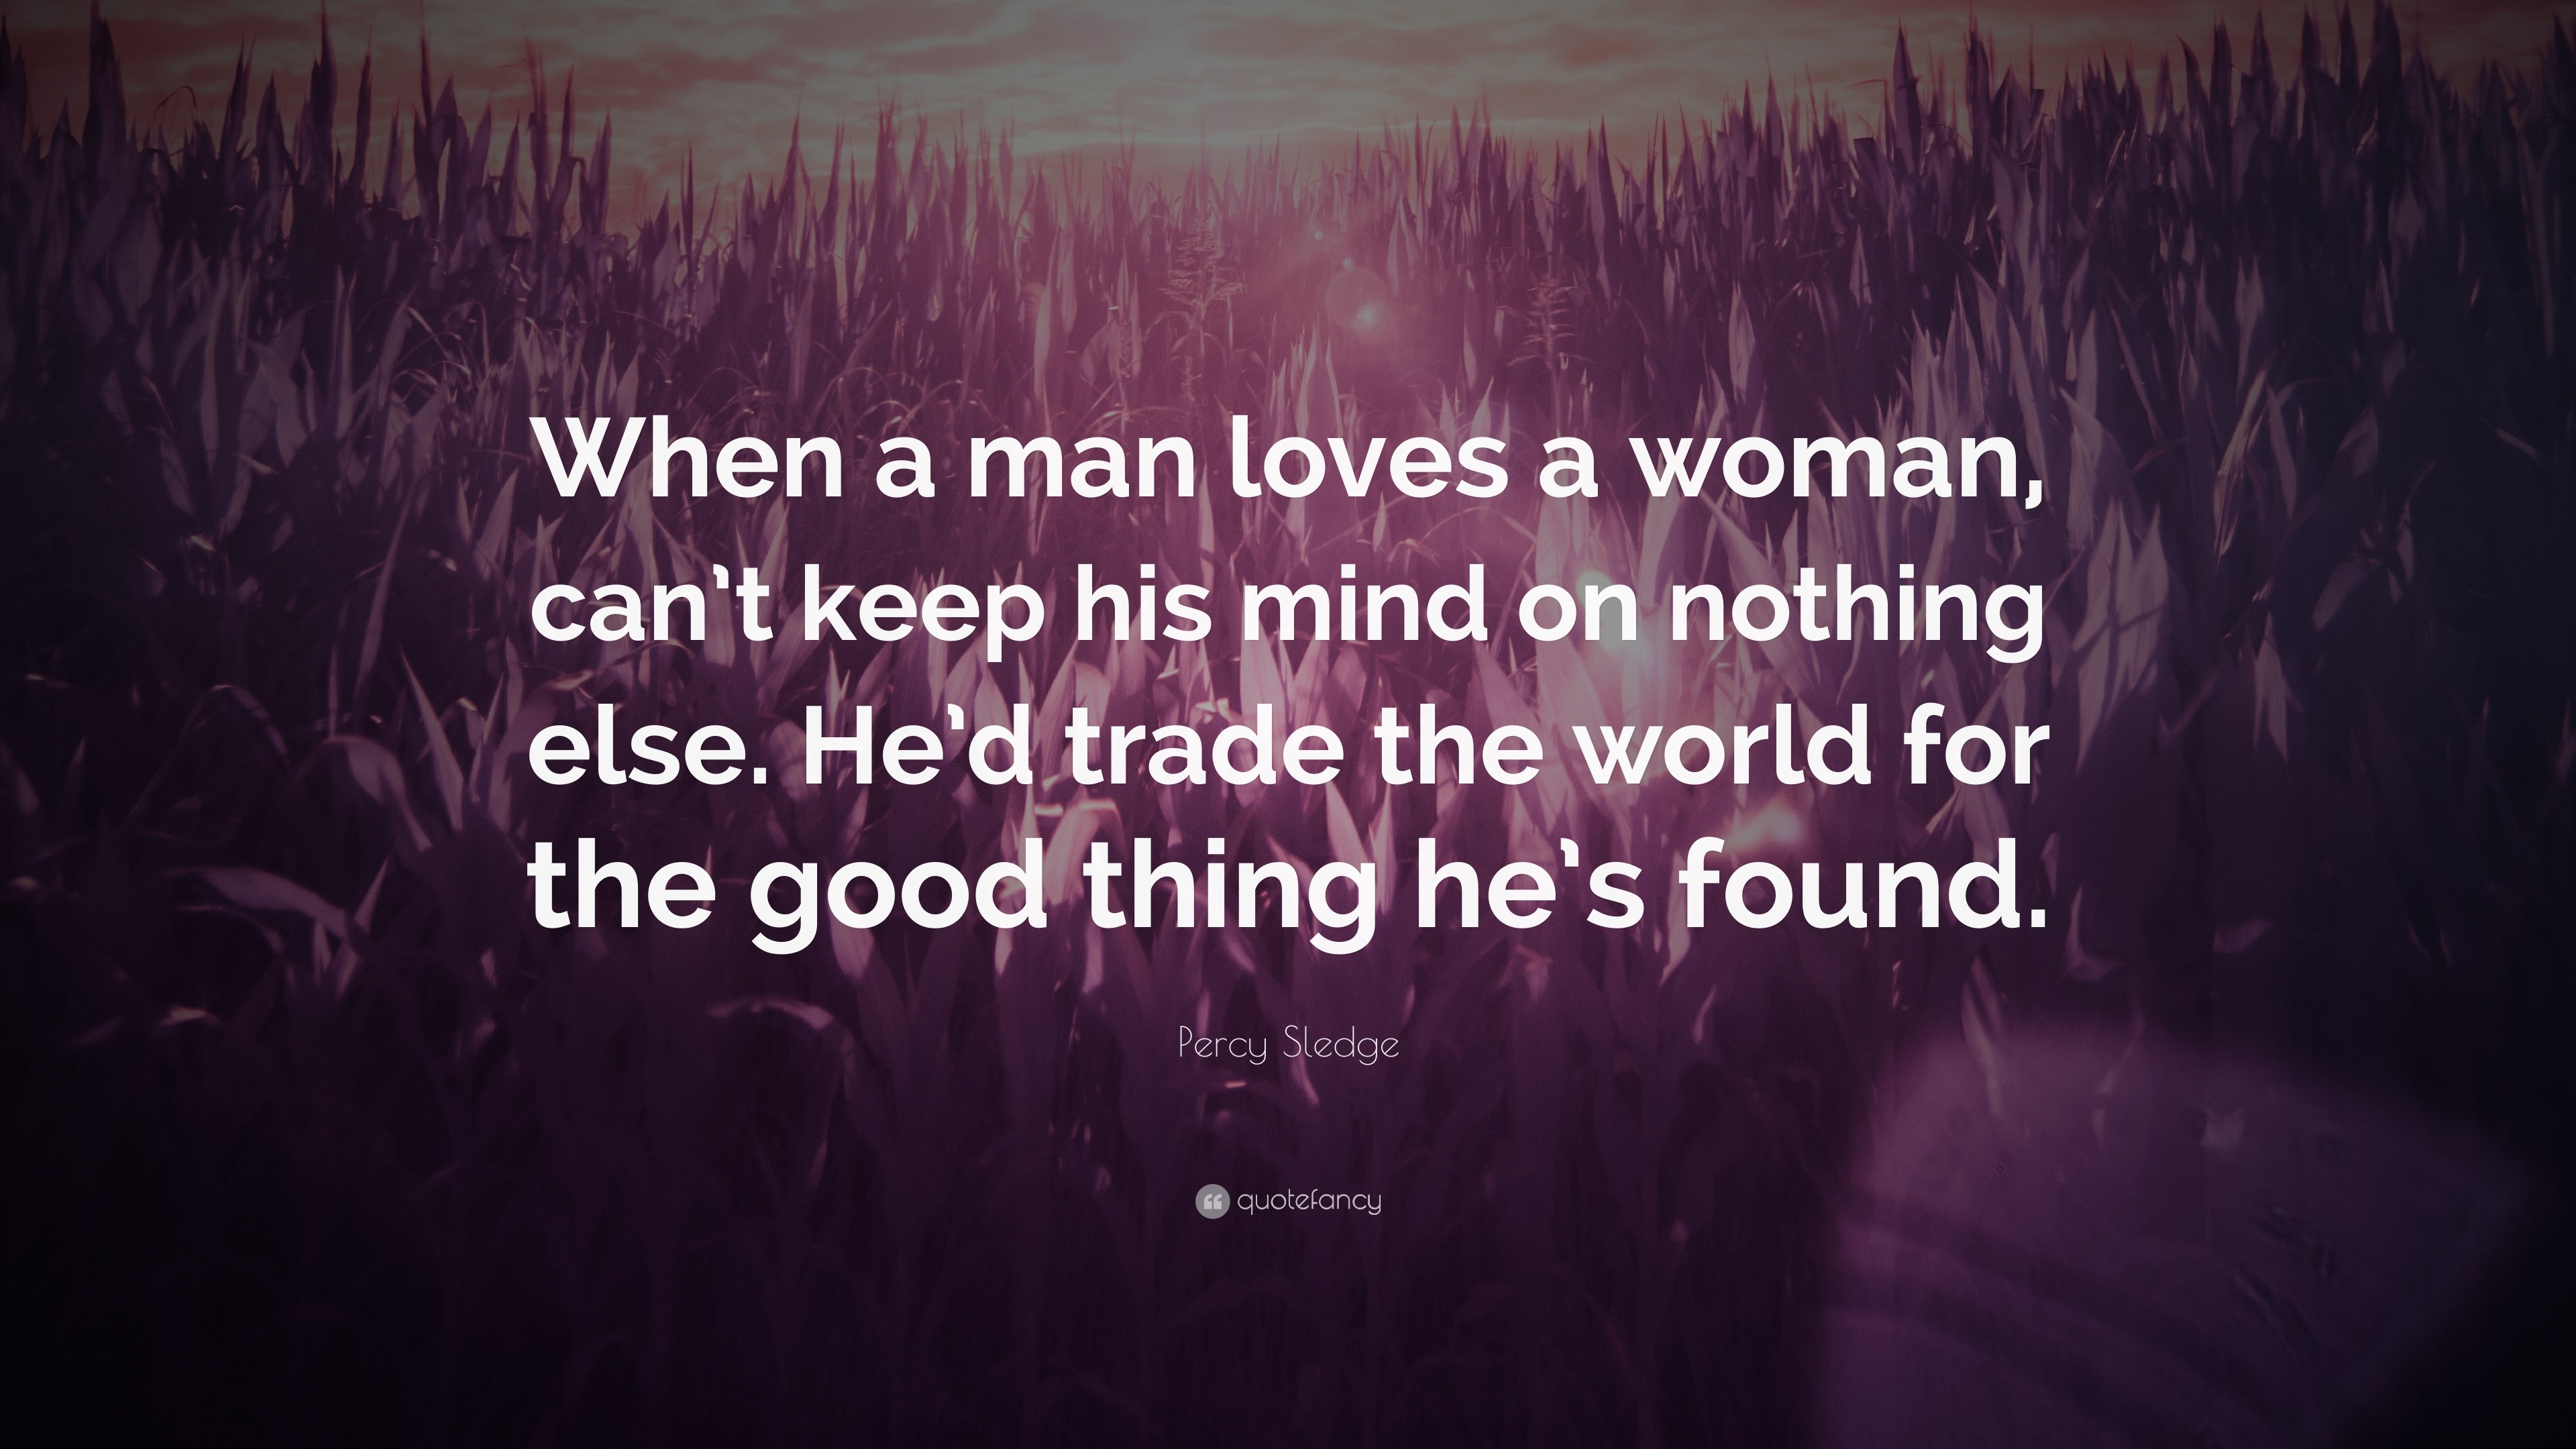 Percy Sledge Quote “When a man loves a woman can t keep